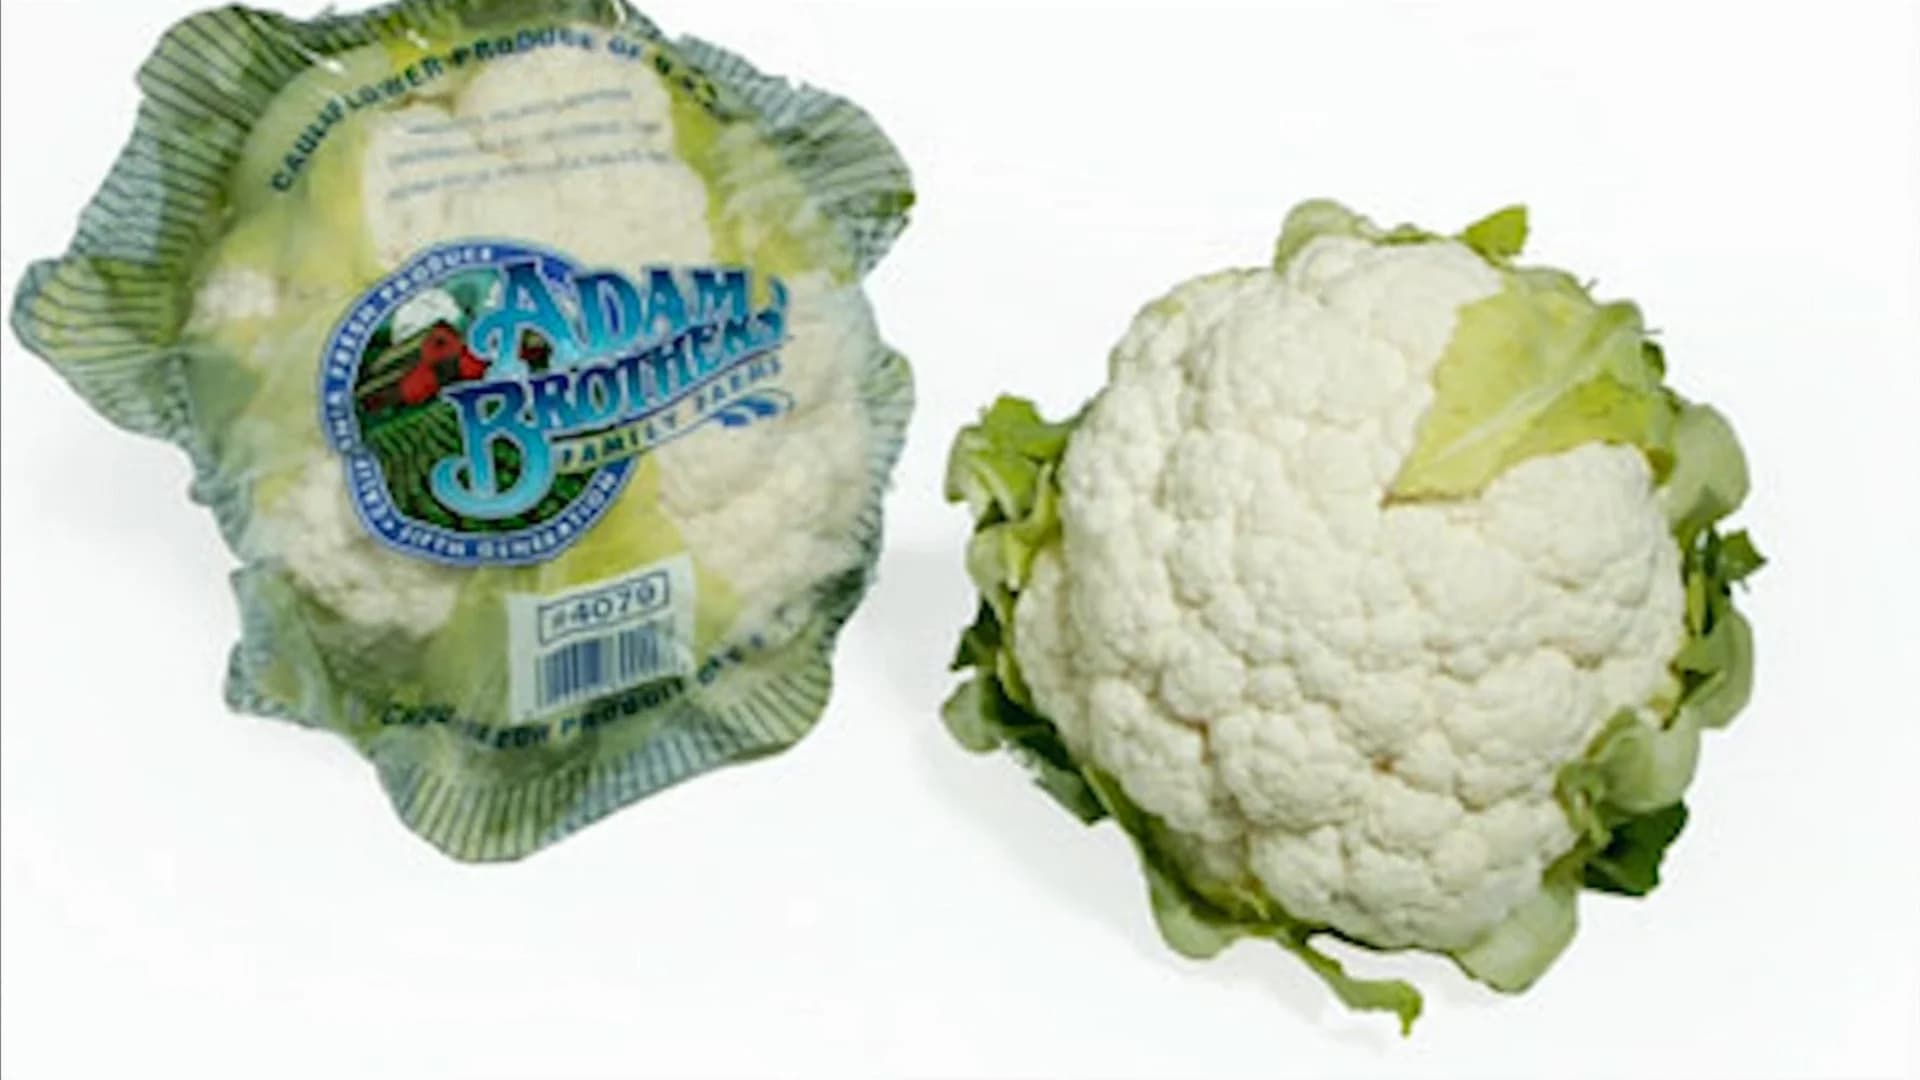 E.coli recall expanded from romaine lettuce, now includes cauliflower